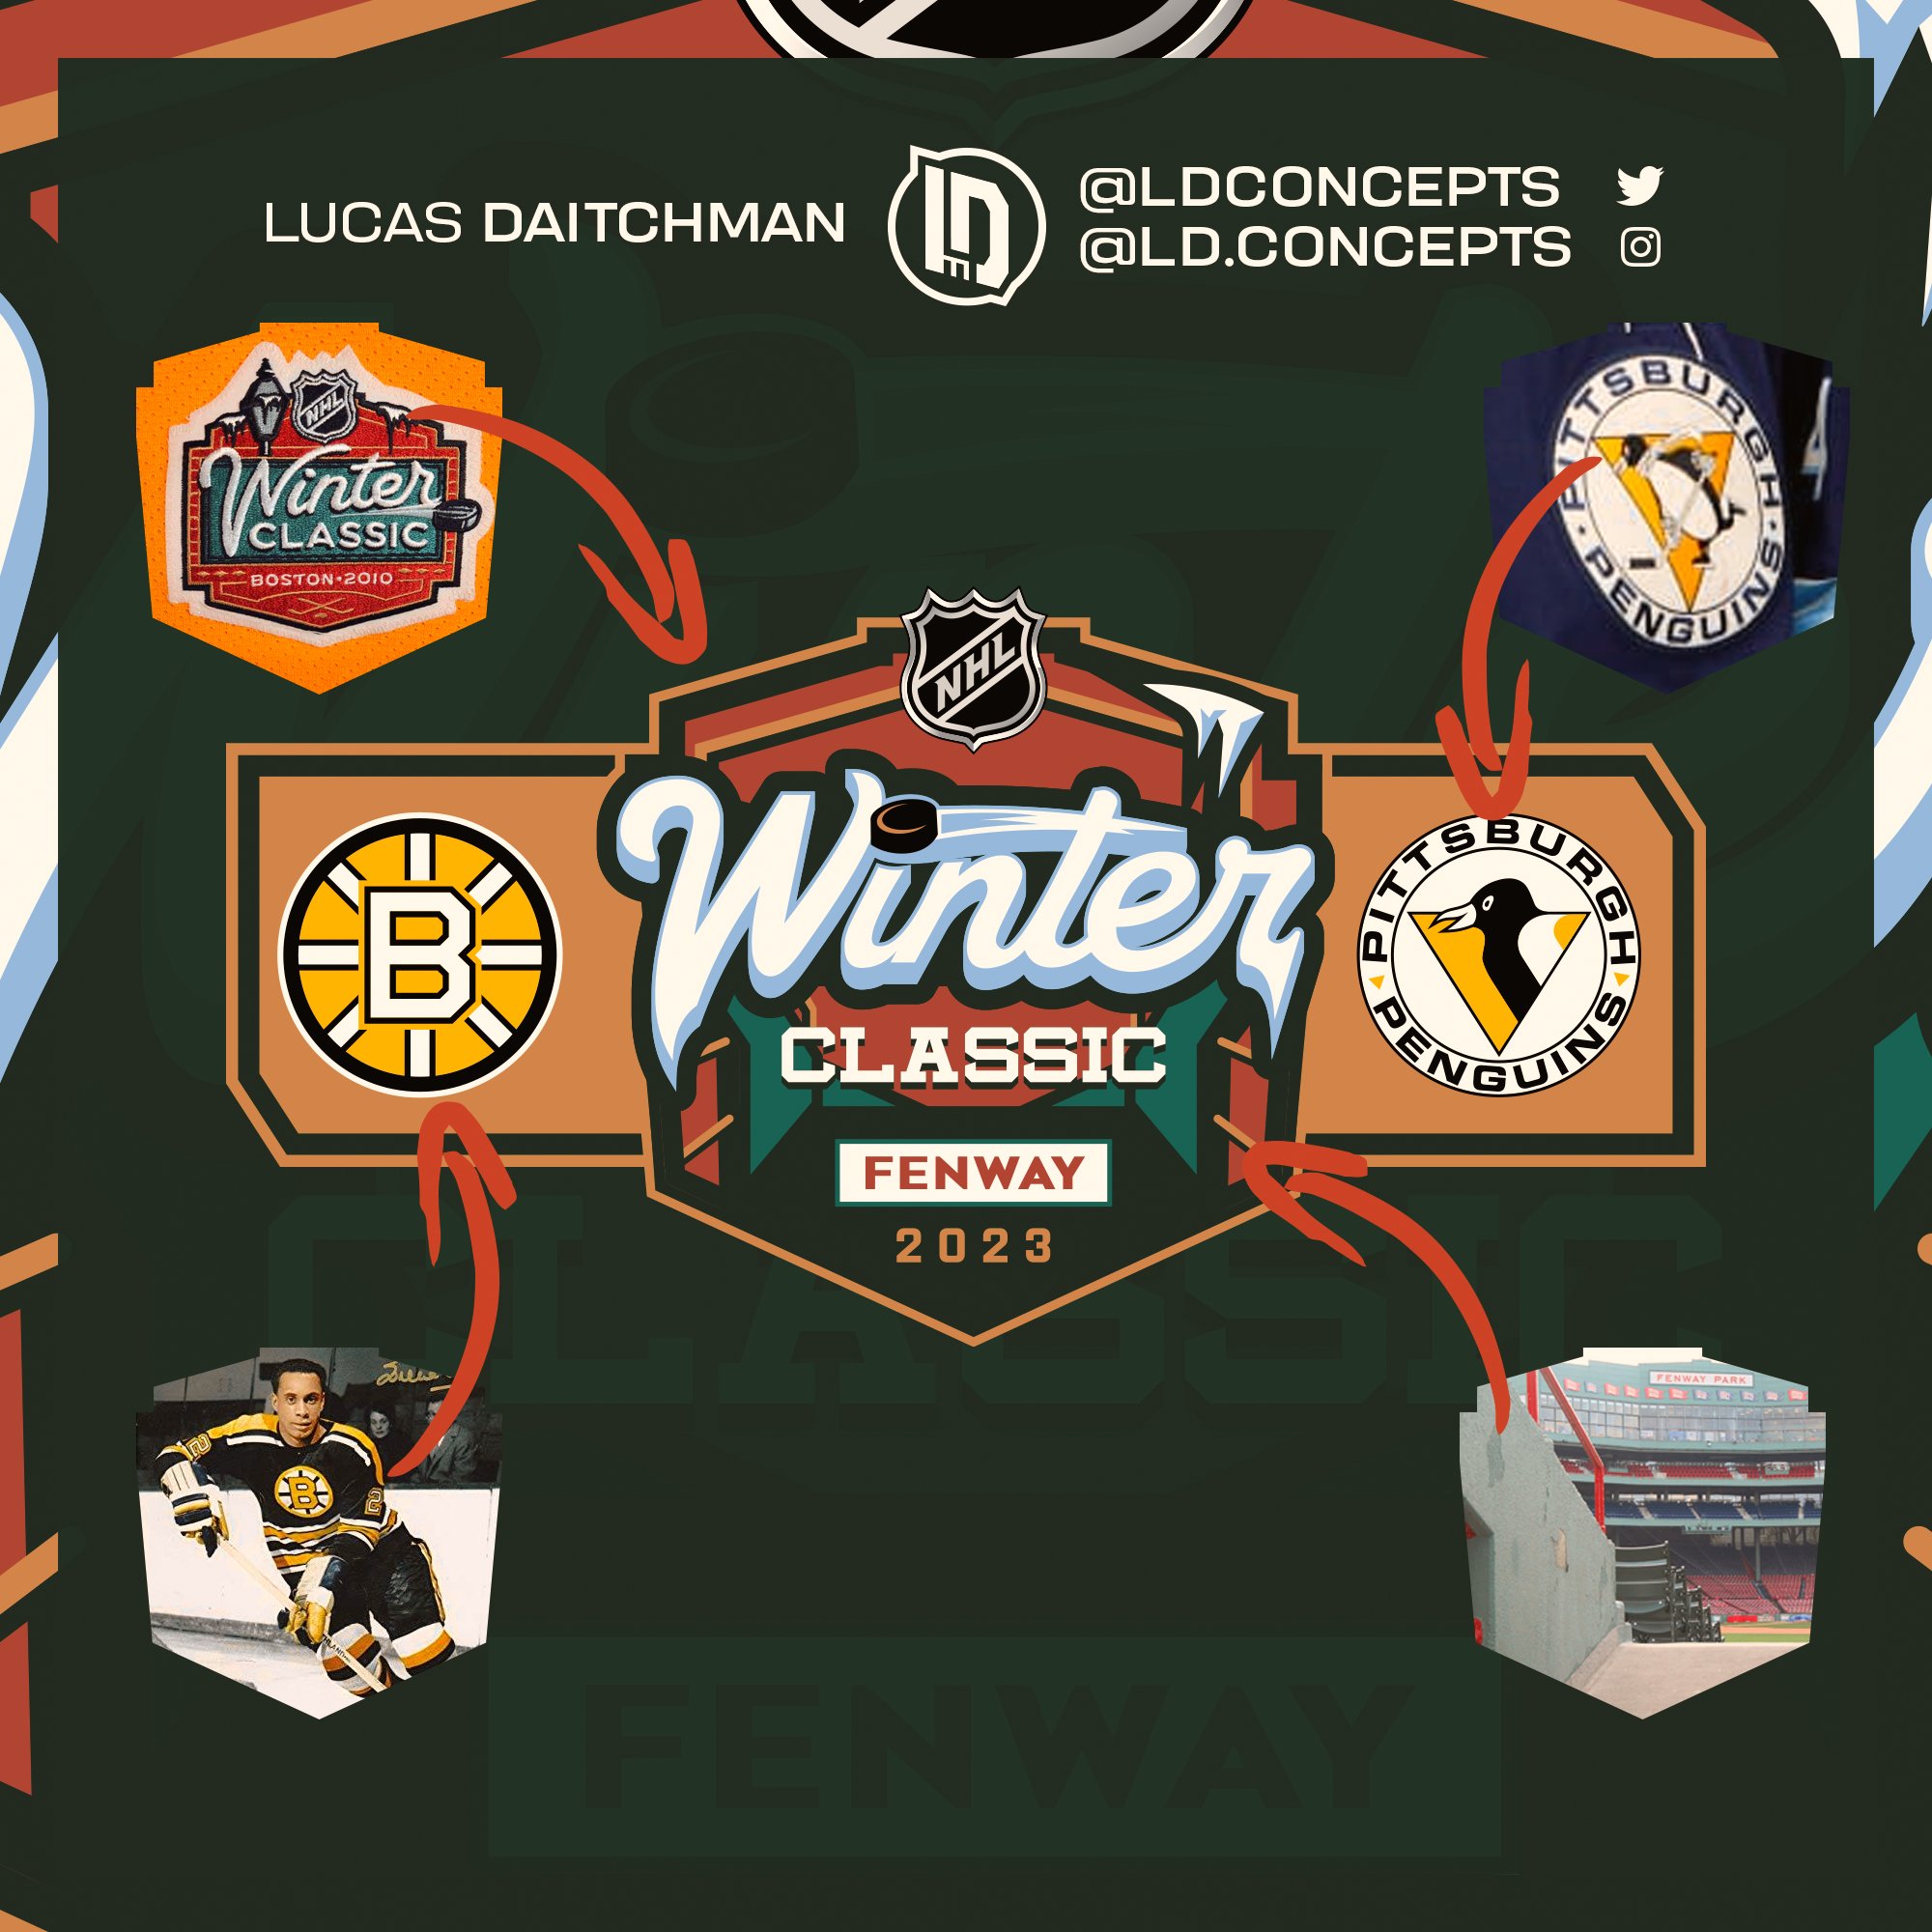 Chris Creamer  SportsLogos.Net on X: RT @ldconcepts: With the 2023 NHL Winter  Classic coming back to Fenway Park next winter, I put together some jersey  and logo concepts for t… / X